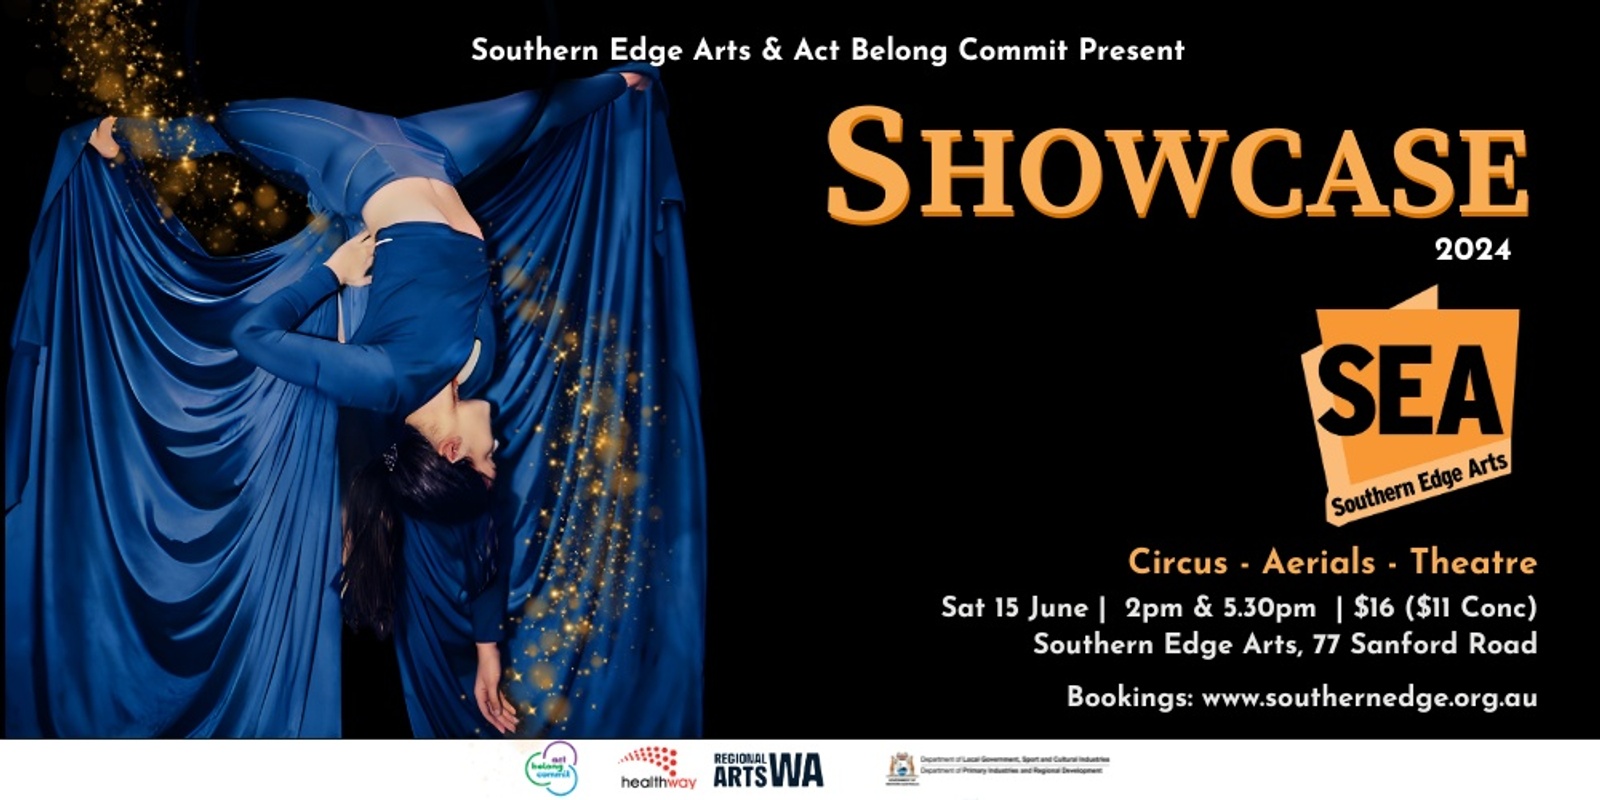 Banner image for Southern Edge Arts Showcase 2024 presented by Act Belong Commit